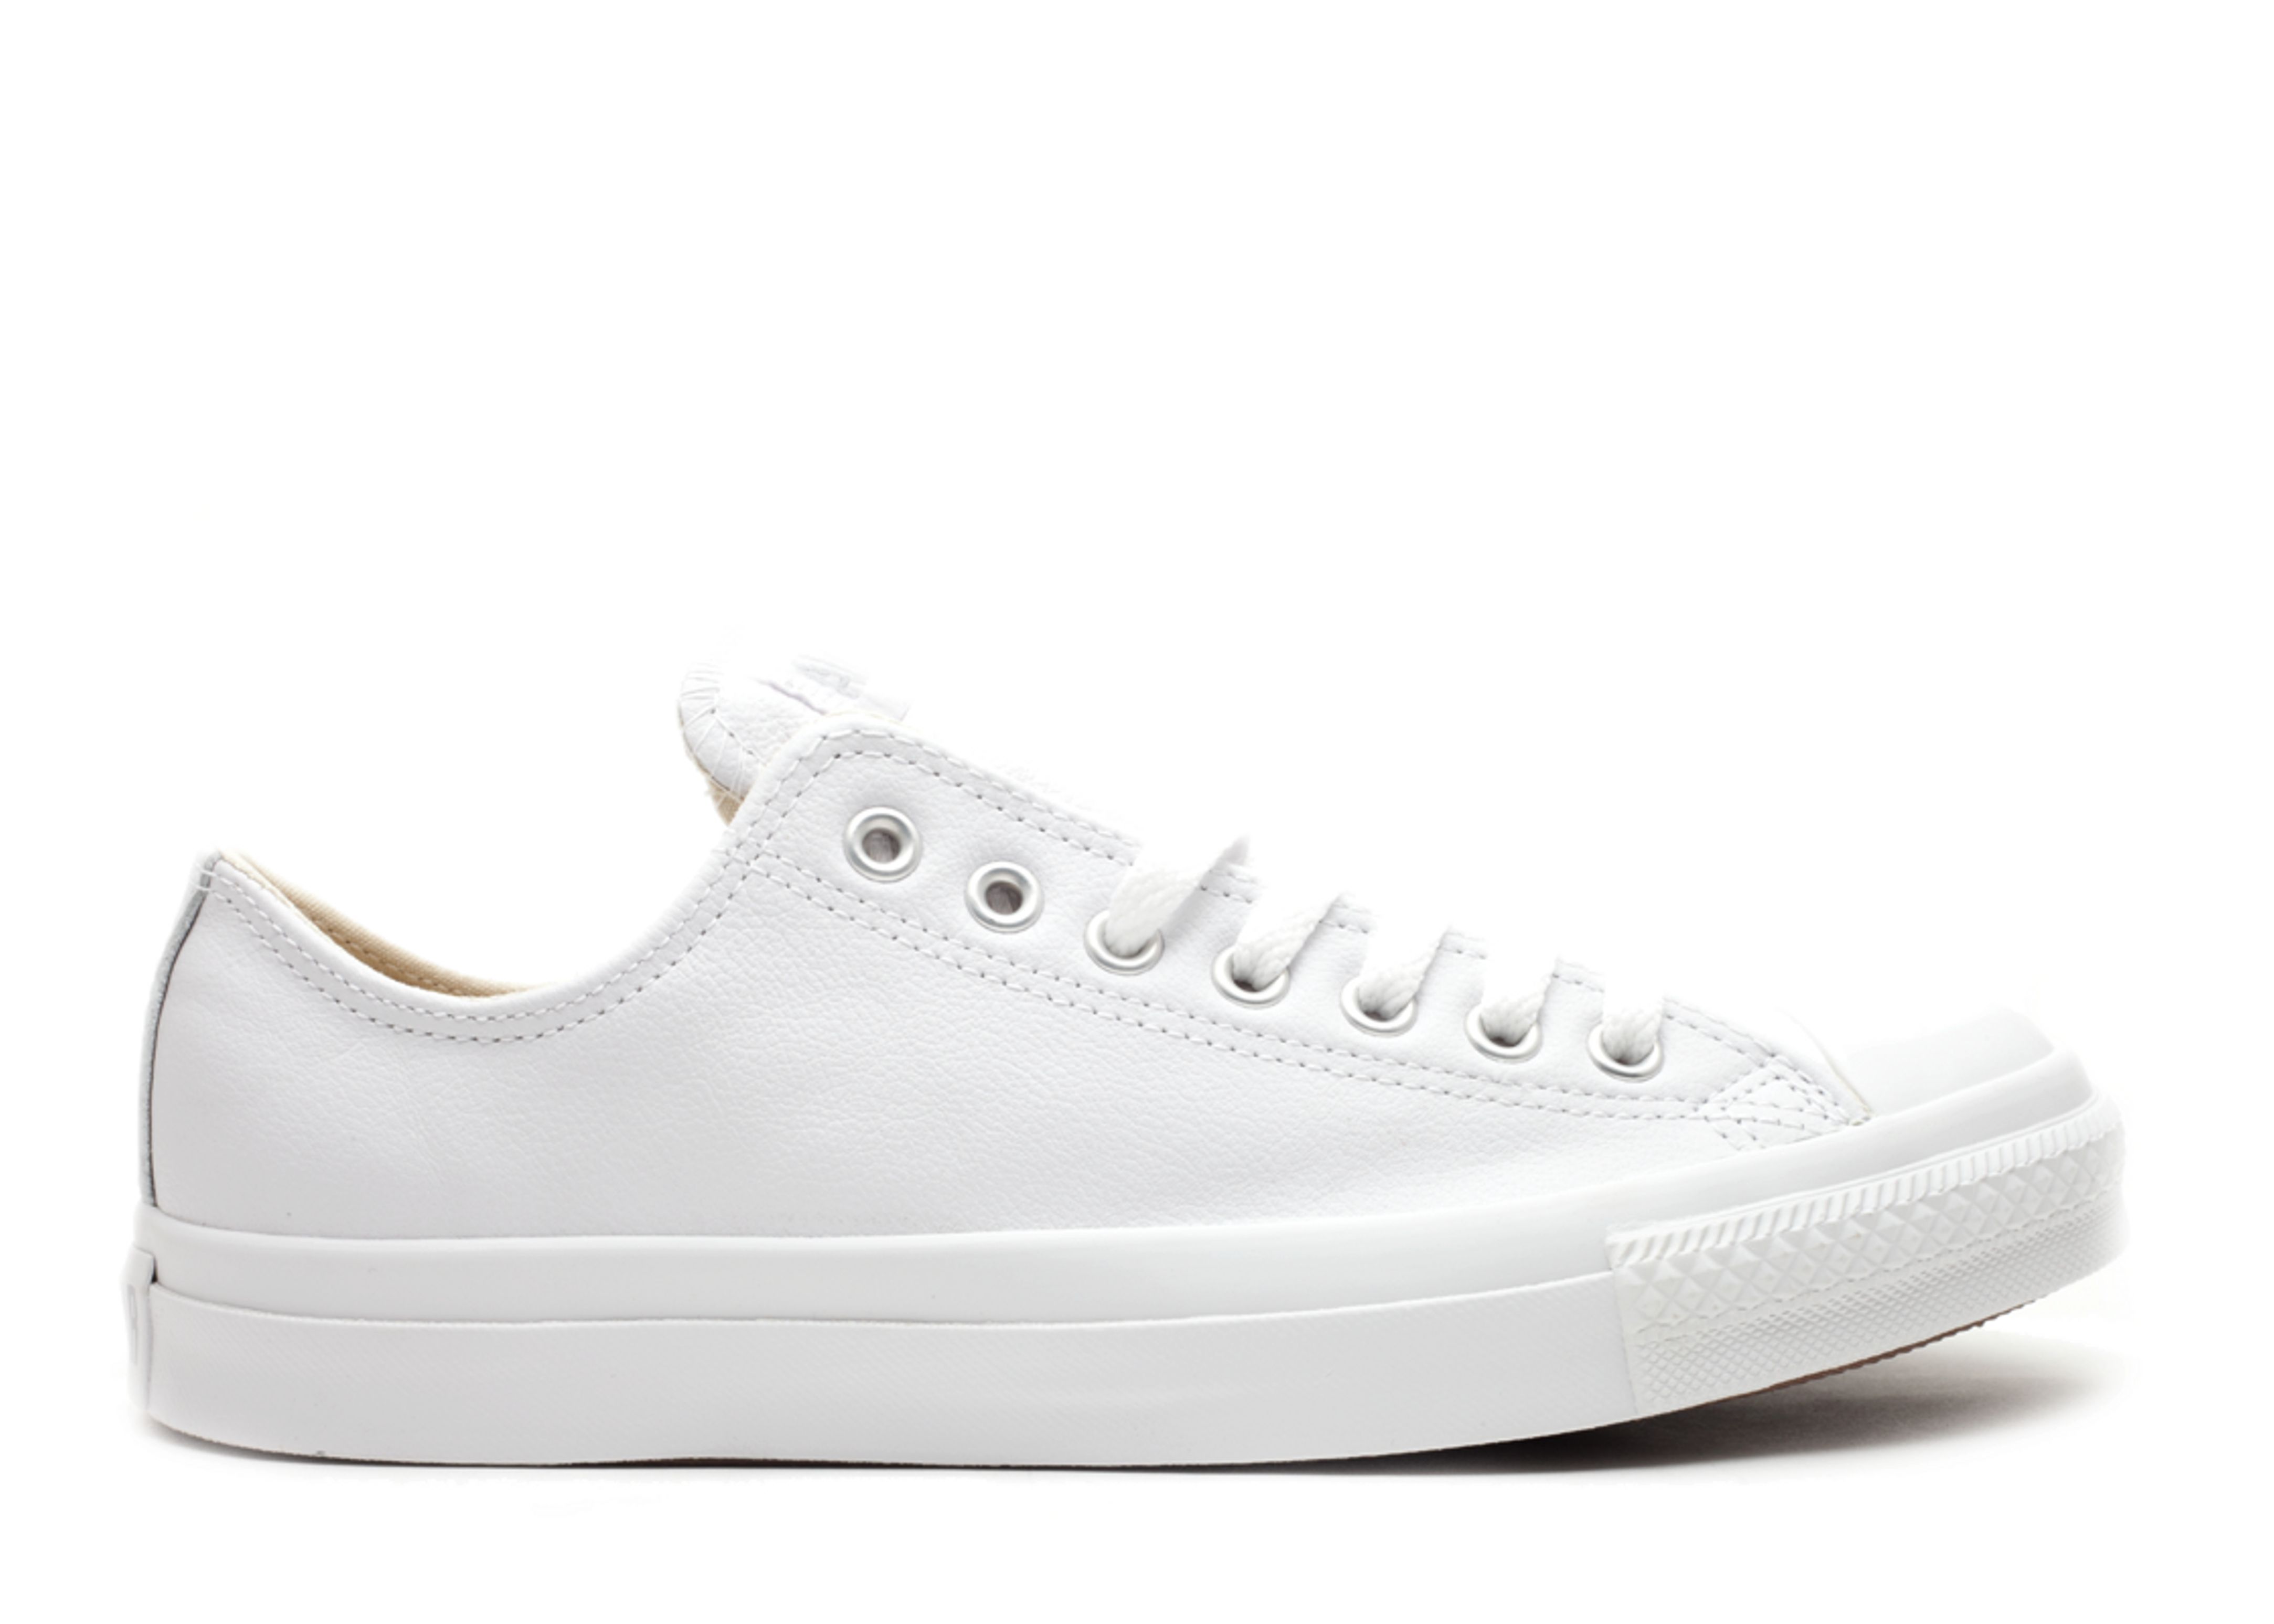 converse all star leather mono ox